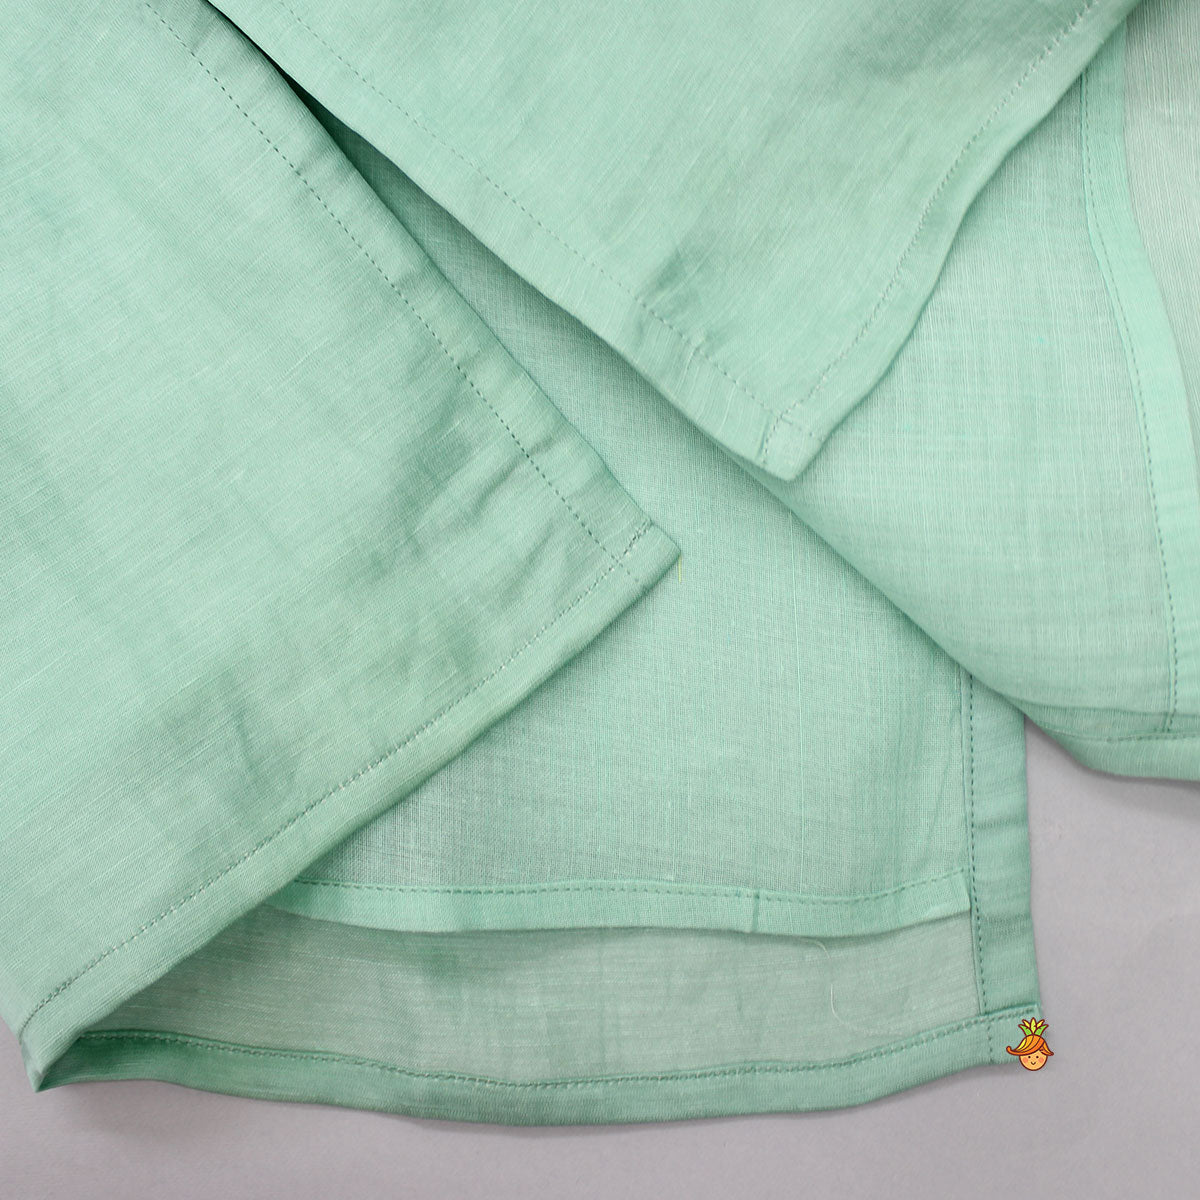 Embroidered Green Kurti And Pant With Striped Multicolour Dupatta